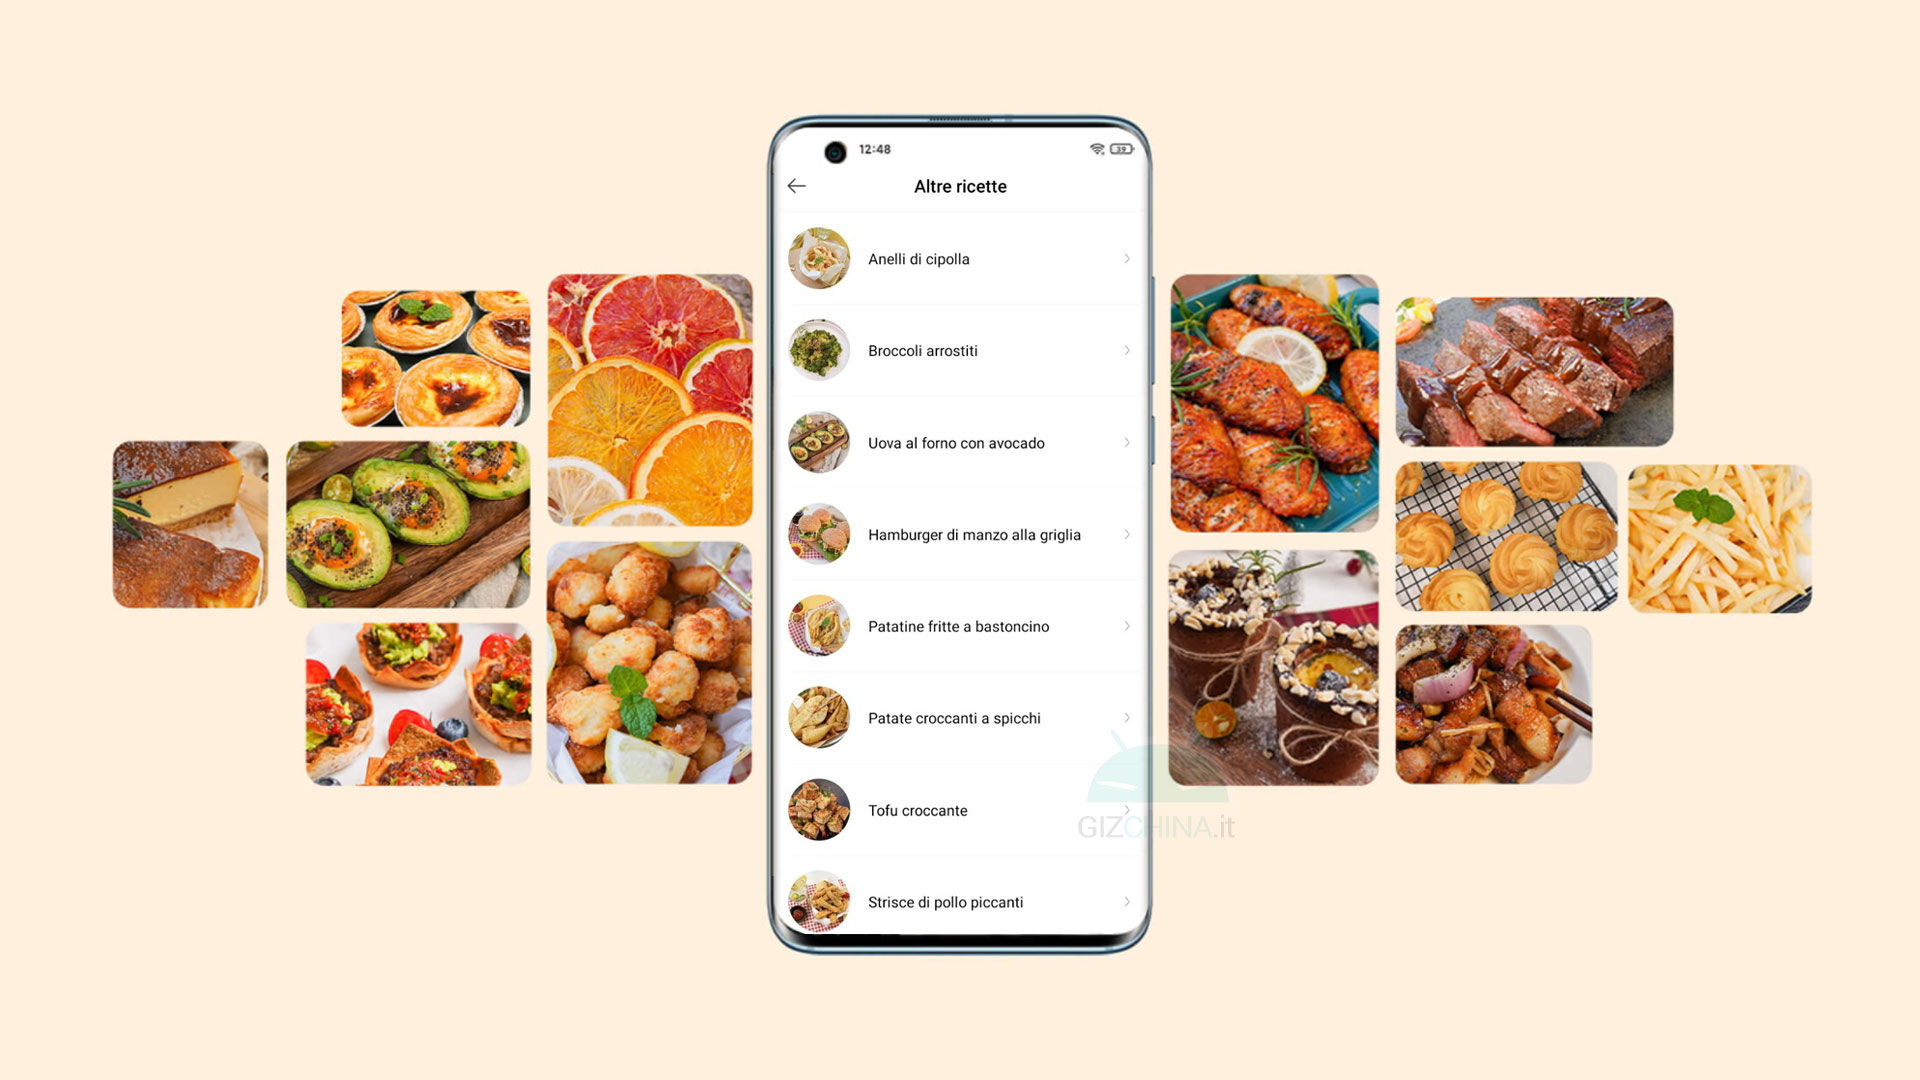 Xiaomi: all the recipes for the air fryer - GizChina.it